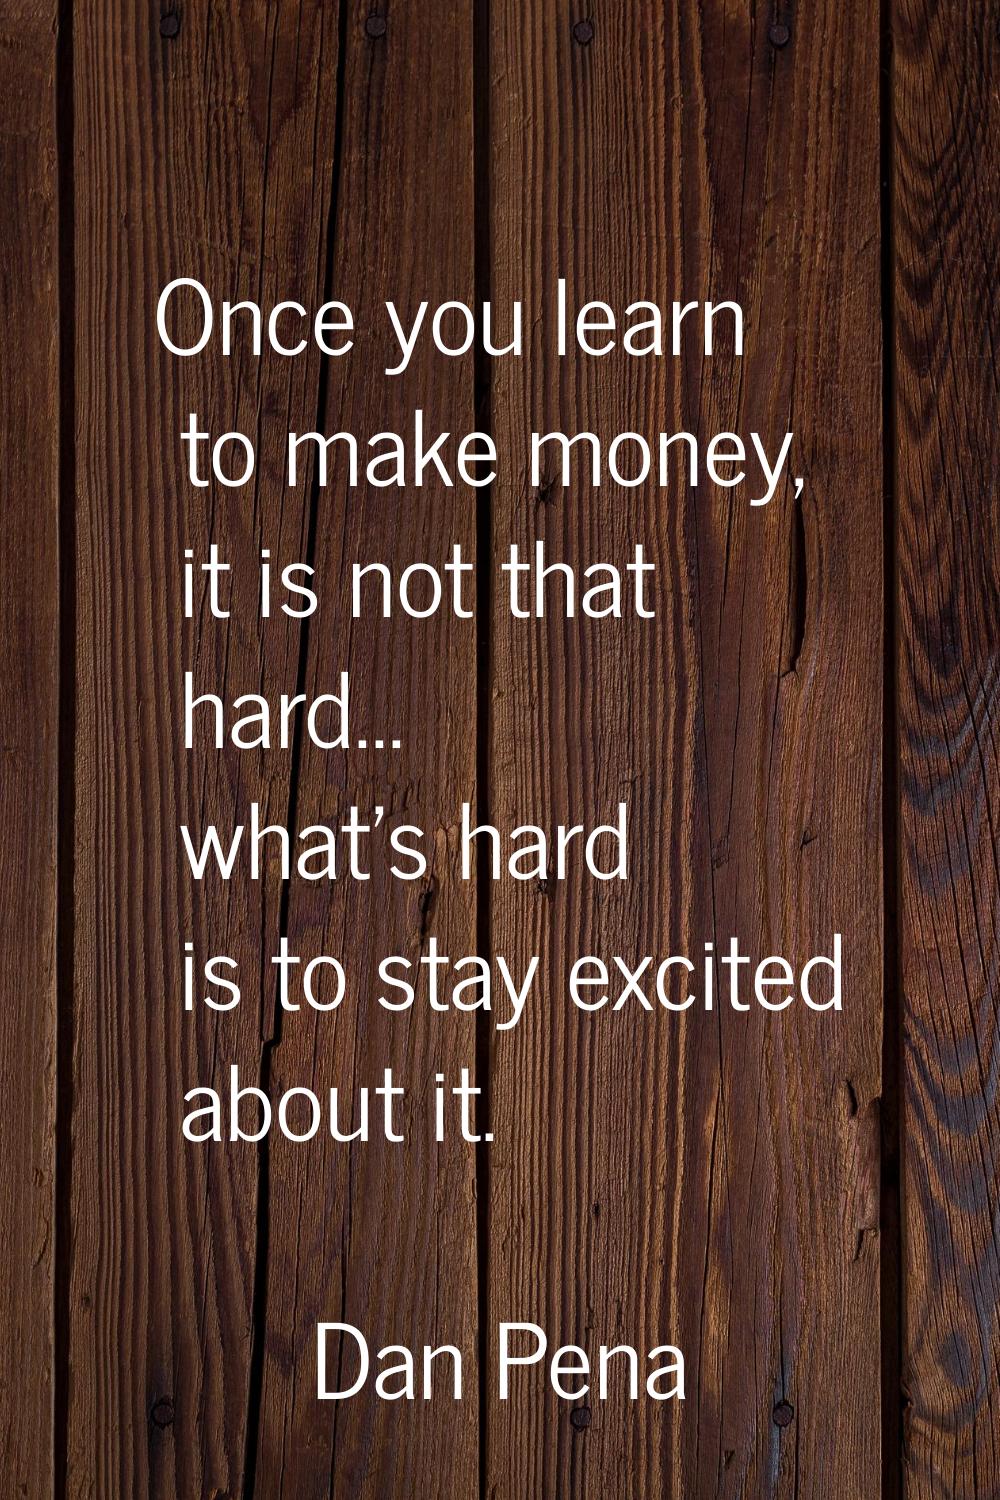 Once you learn to make money, it is not that hard... what's hard is to stay excited about it.